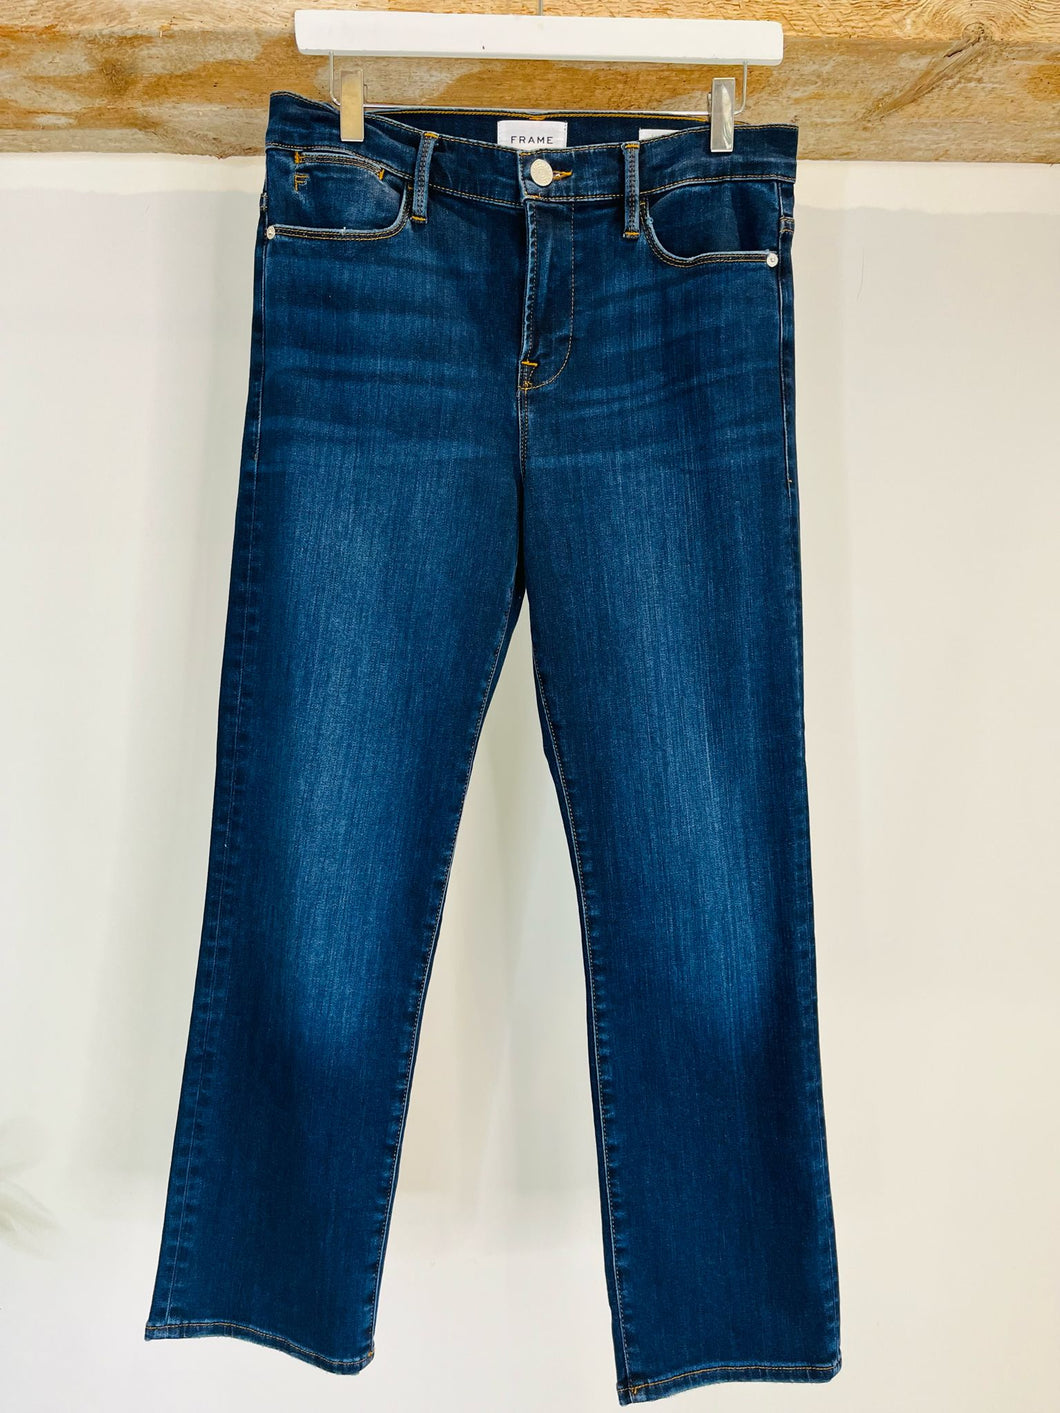 Le High Straight Jeans - Size 29